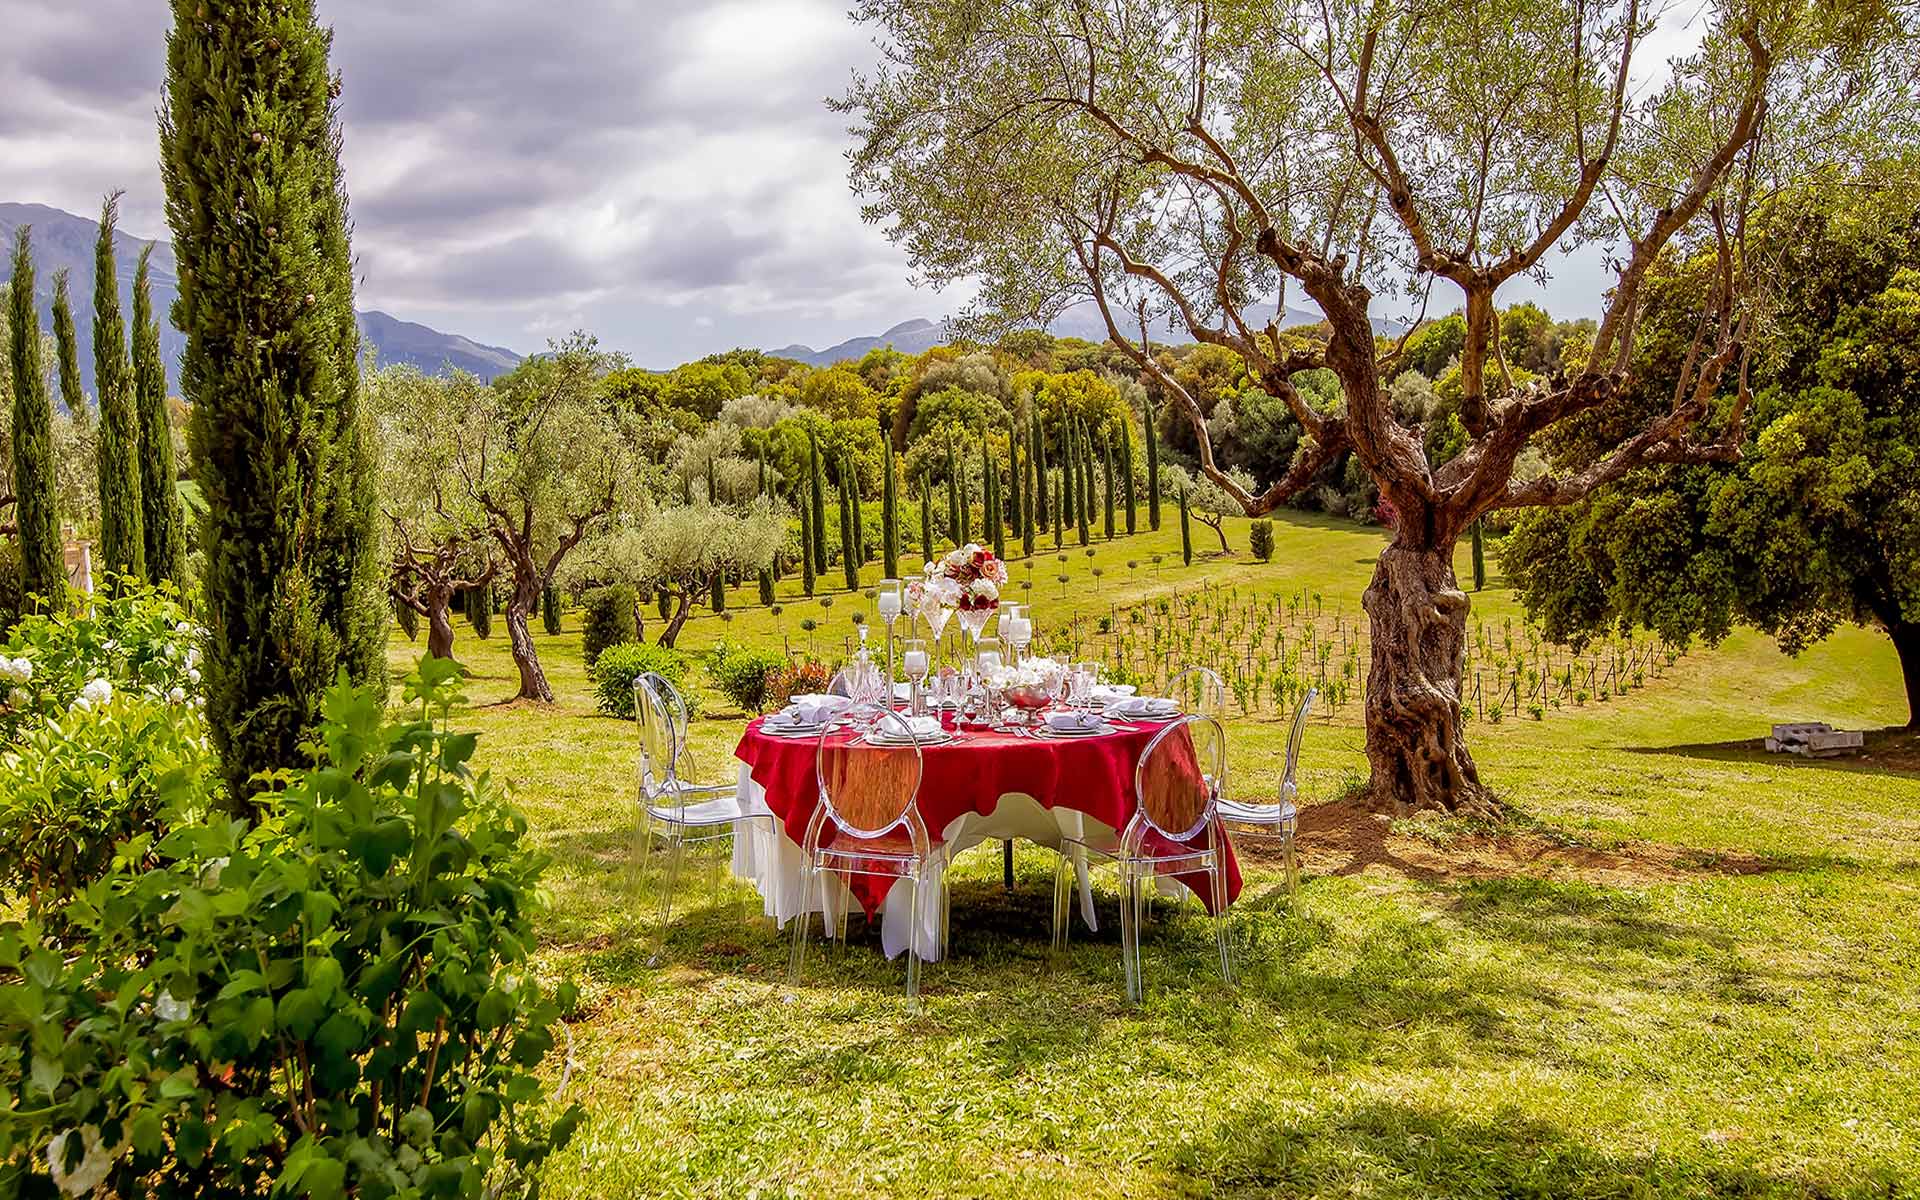 Romantic Red Table Set Up In A Field